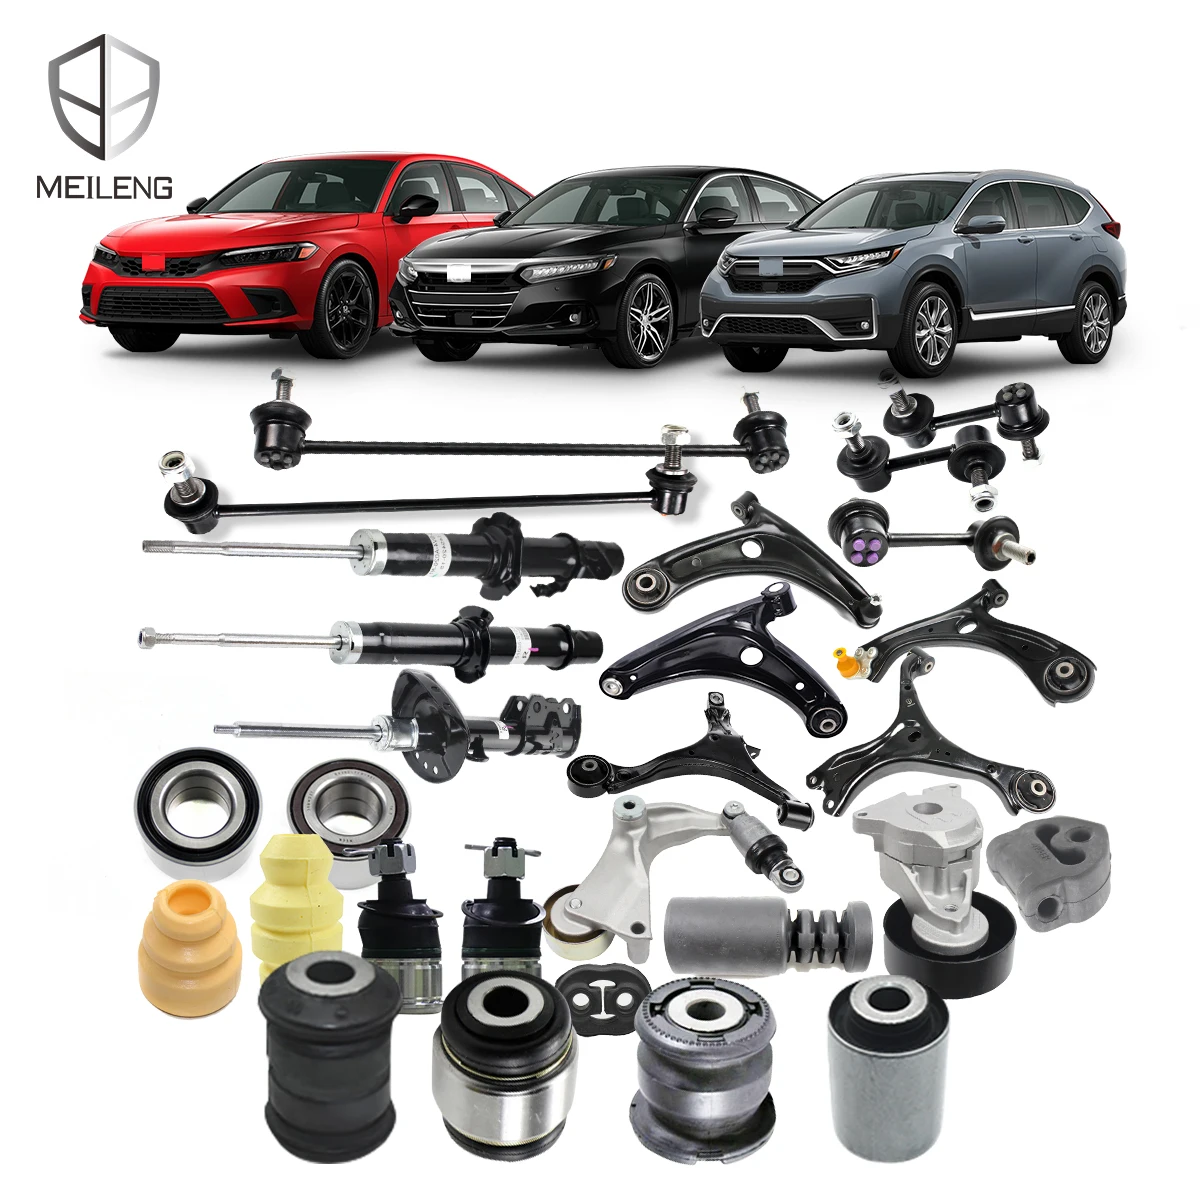 Wholesale Car Spare Parts Suspension Parts Engine Parts Body Kits Car  Accessories for Toyota Camry Asv7# - China Toyota Parts, Autoparts